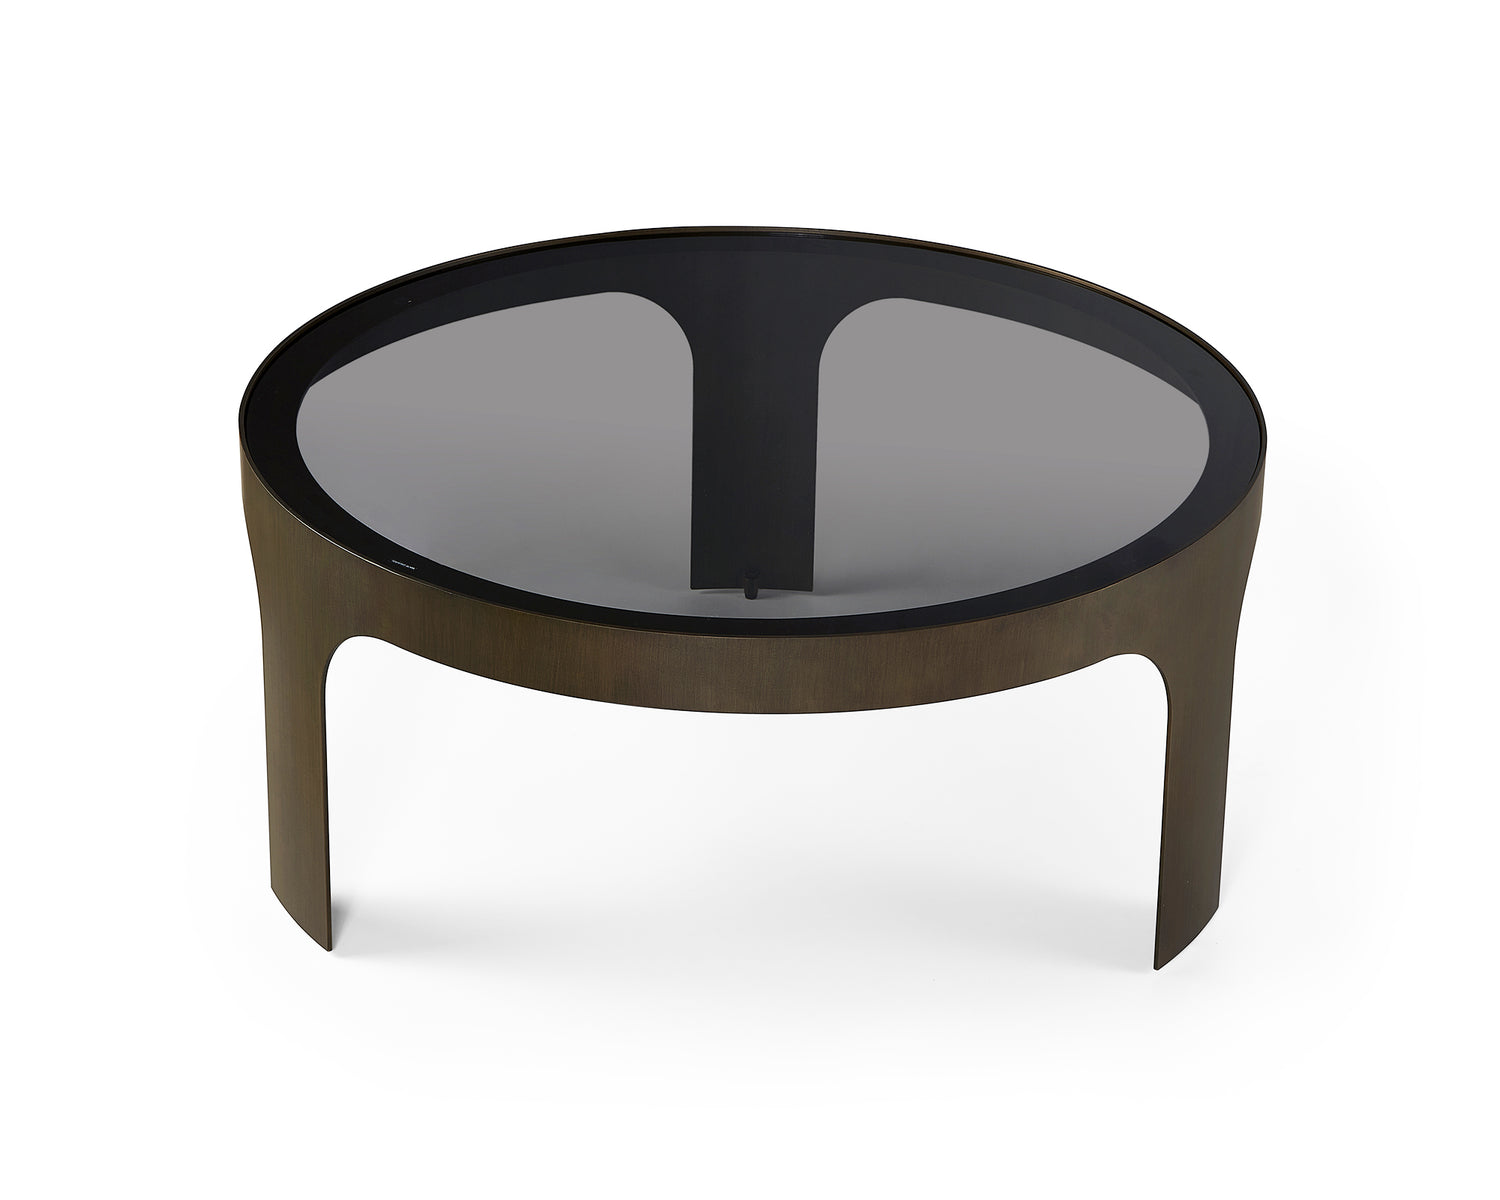 Arch coffee table – antique bronze/smoked black